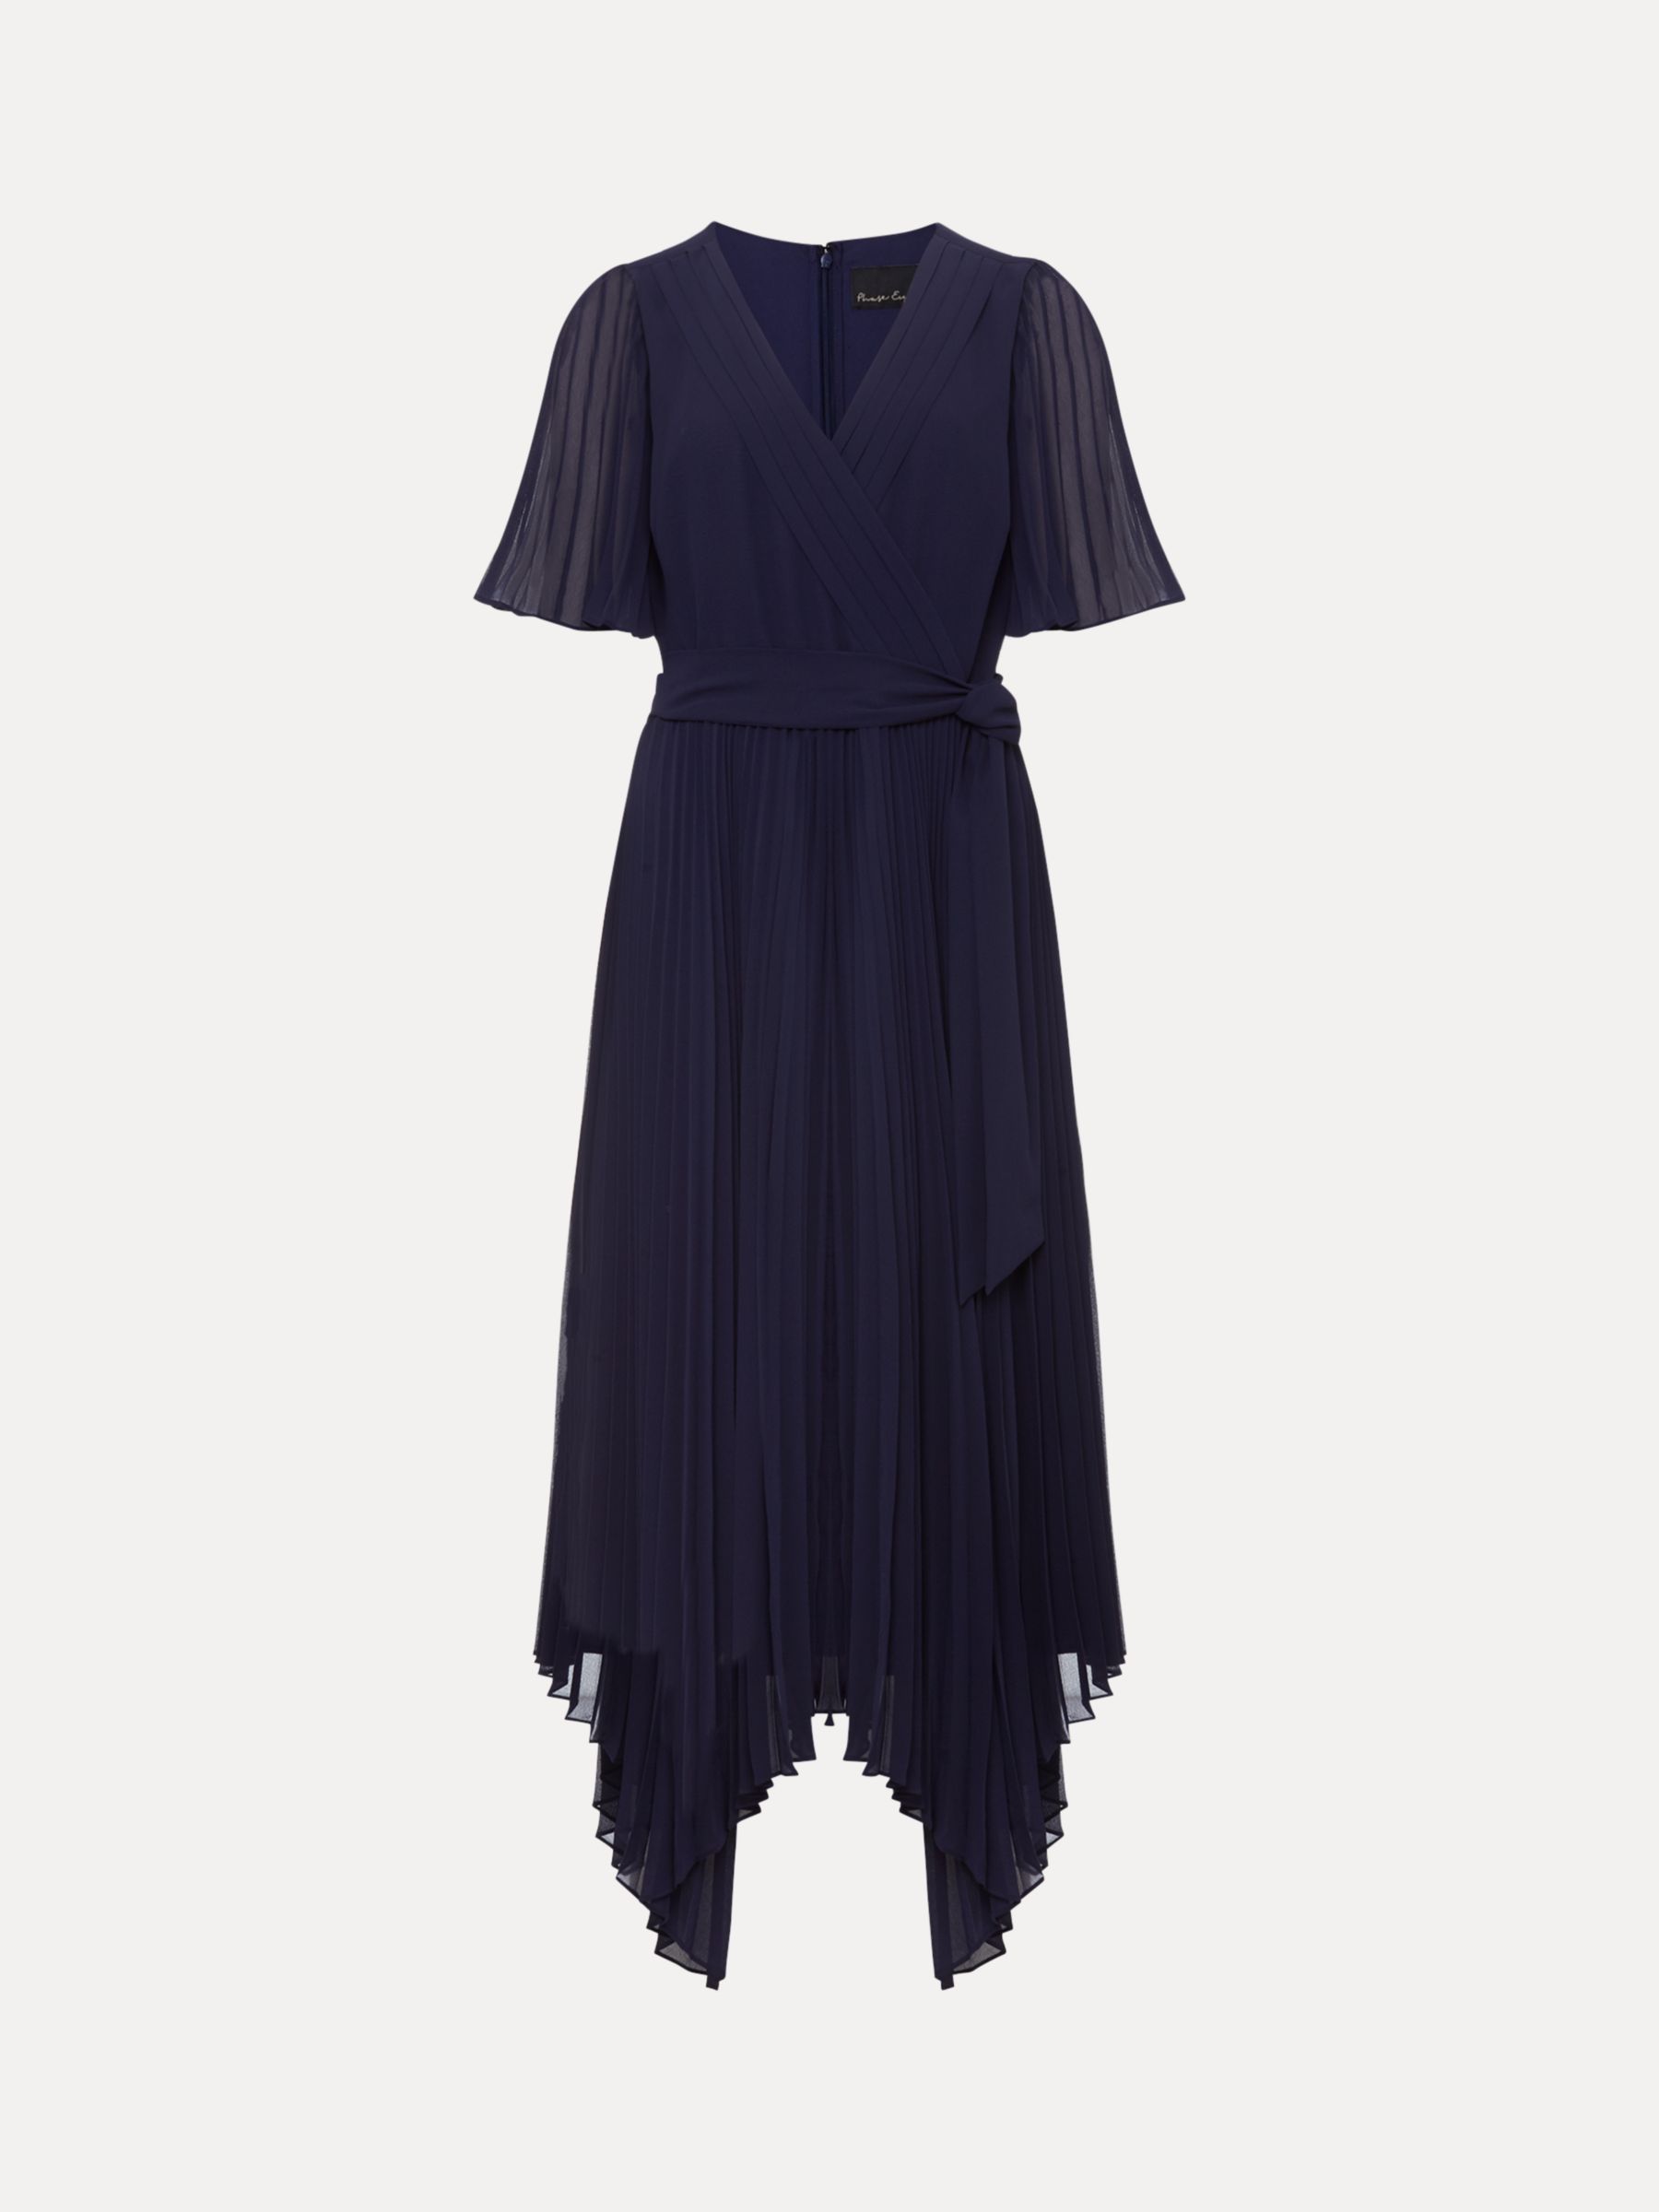 Phase Eight Kendall Pleated Midi Dress, Navy at John Lewis & Partners